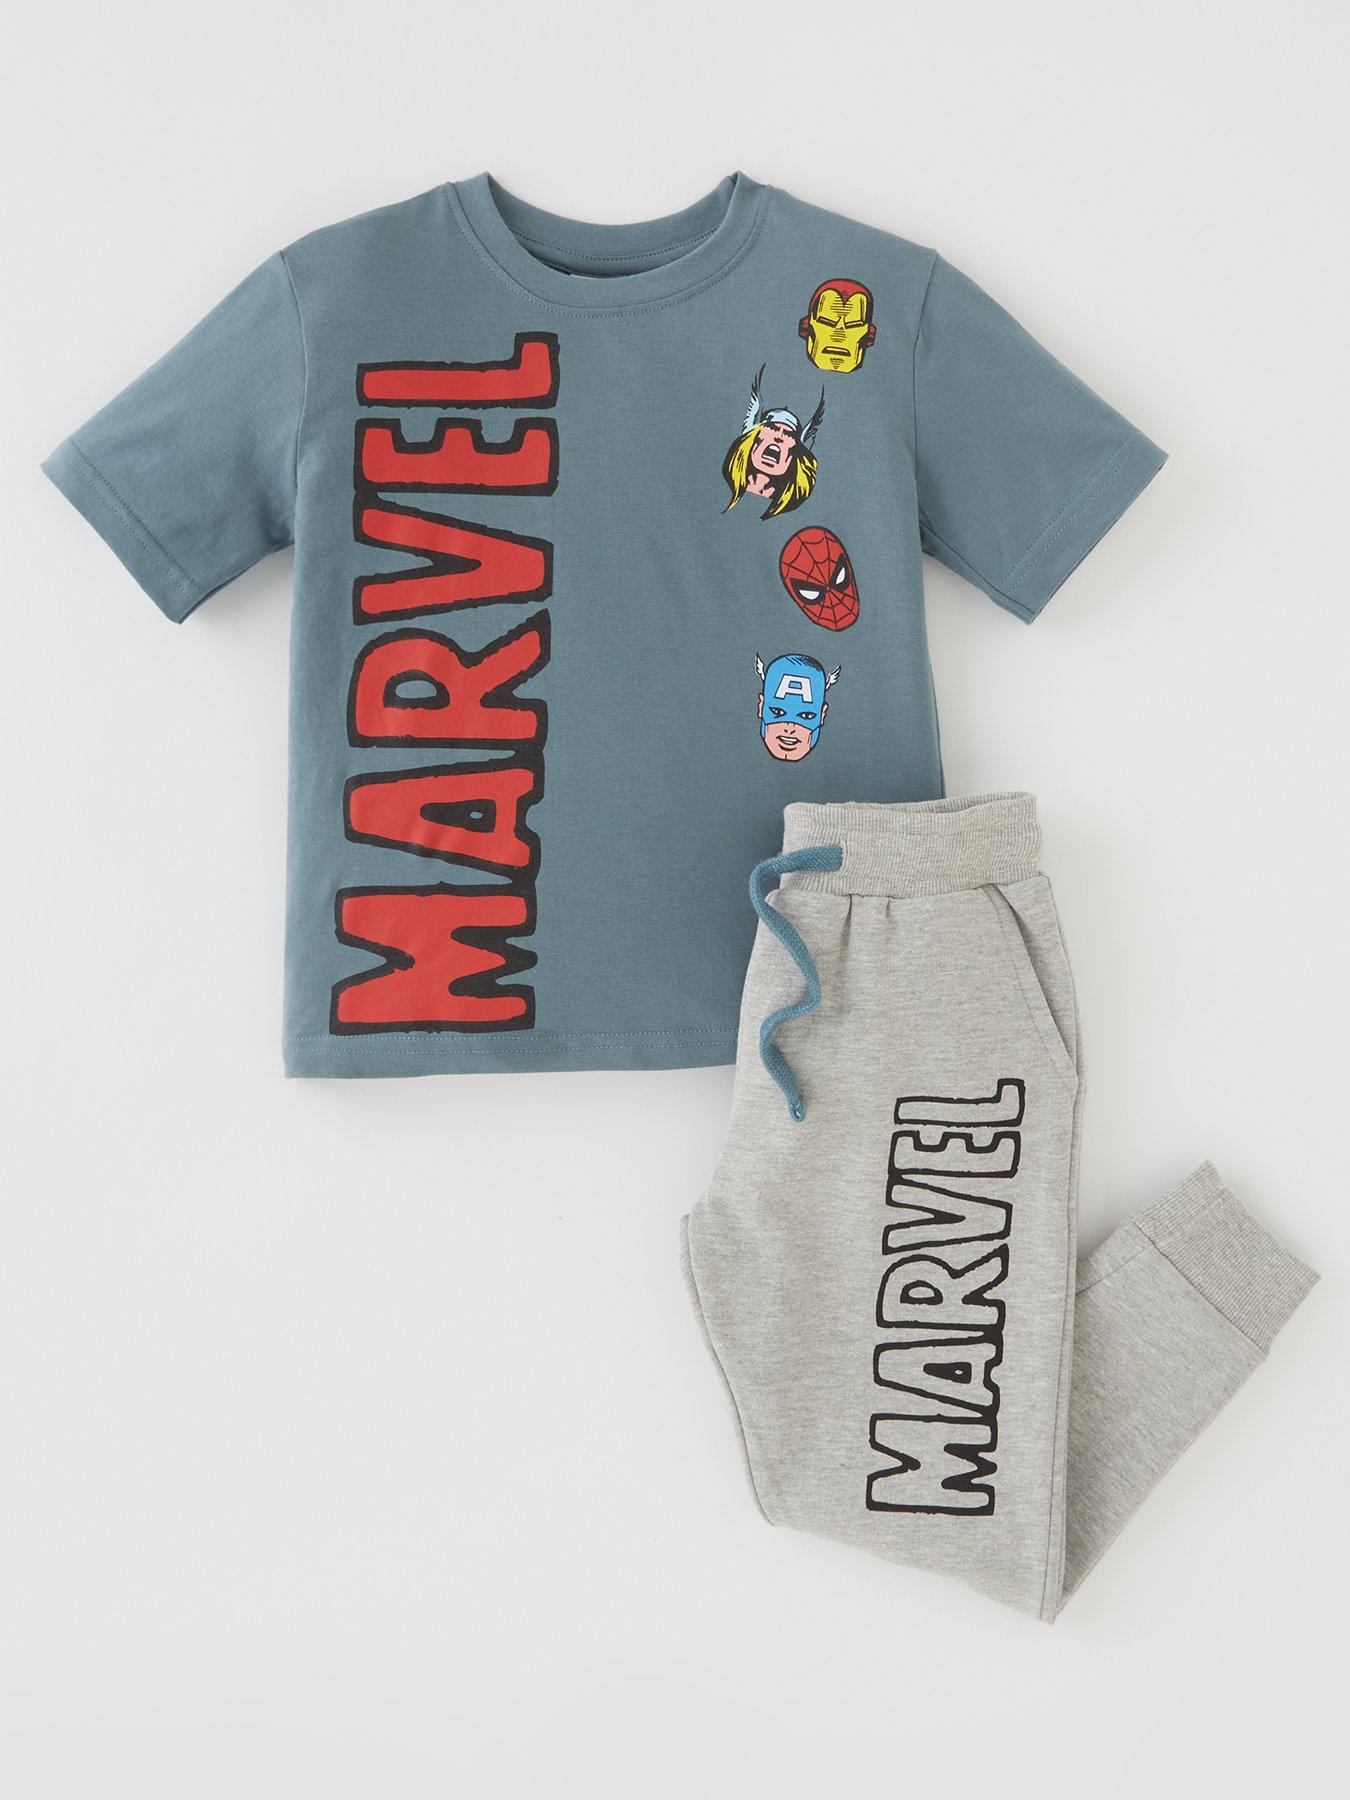 Details about   Wonder Park Graphic T-Shirt Youth Size Gray 100% Cotton 2019 Movie 